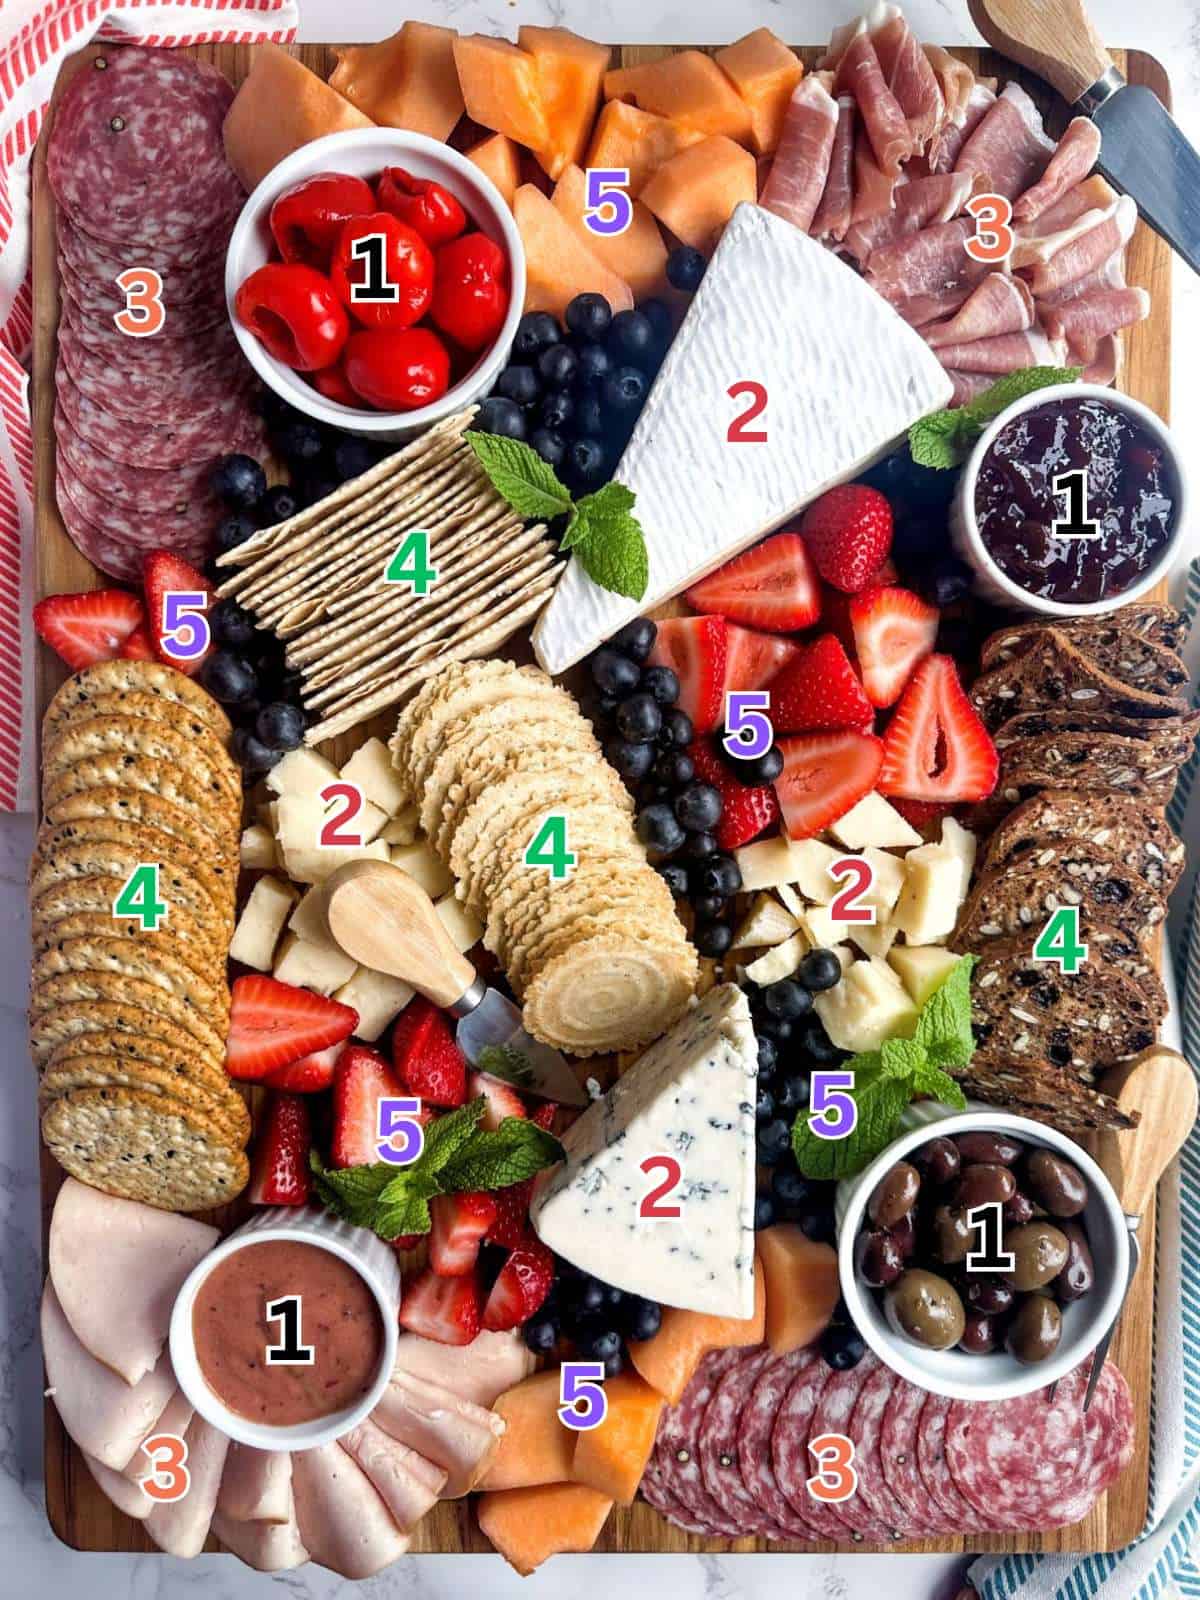 Charcuterie board with step number labels 1 through 5.